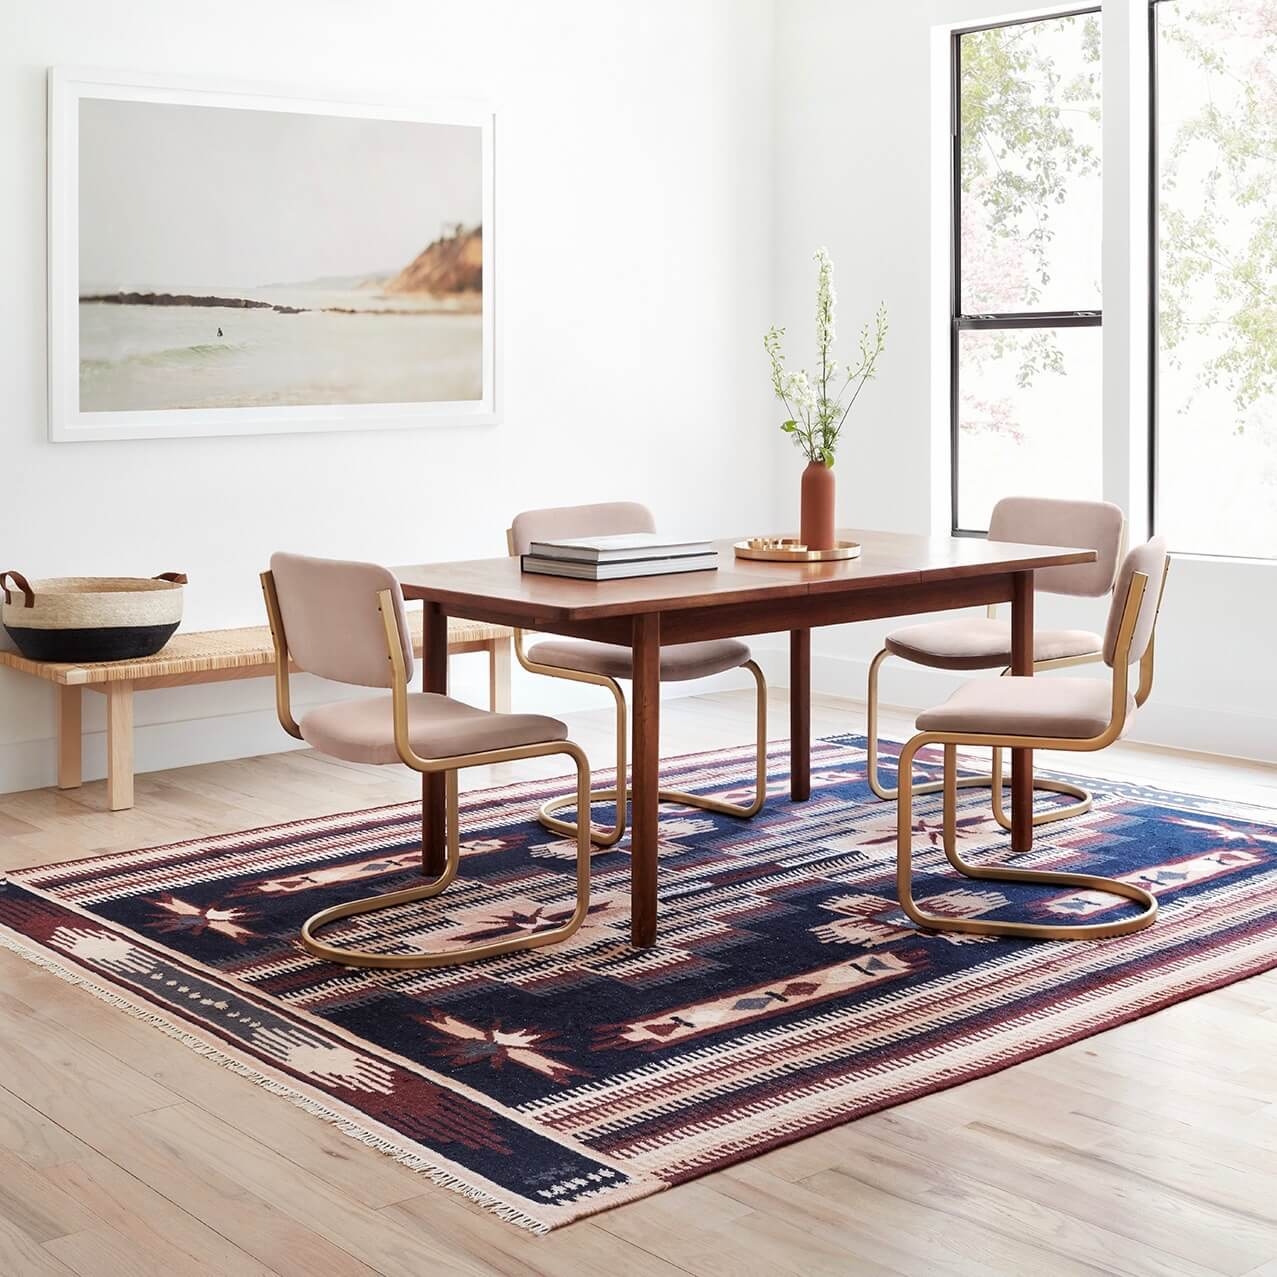 The Citizenry Keya Handwoven Area Rug | 9' x 12' | Made You Blush - Image 1